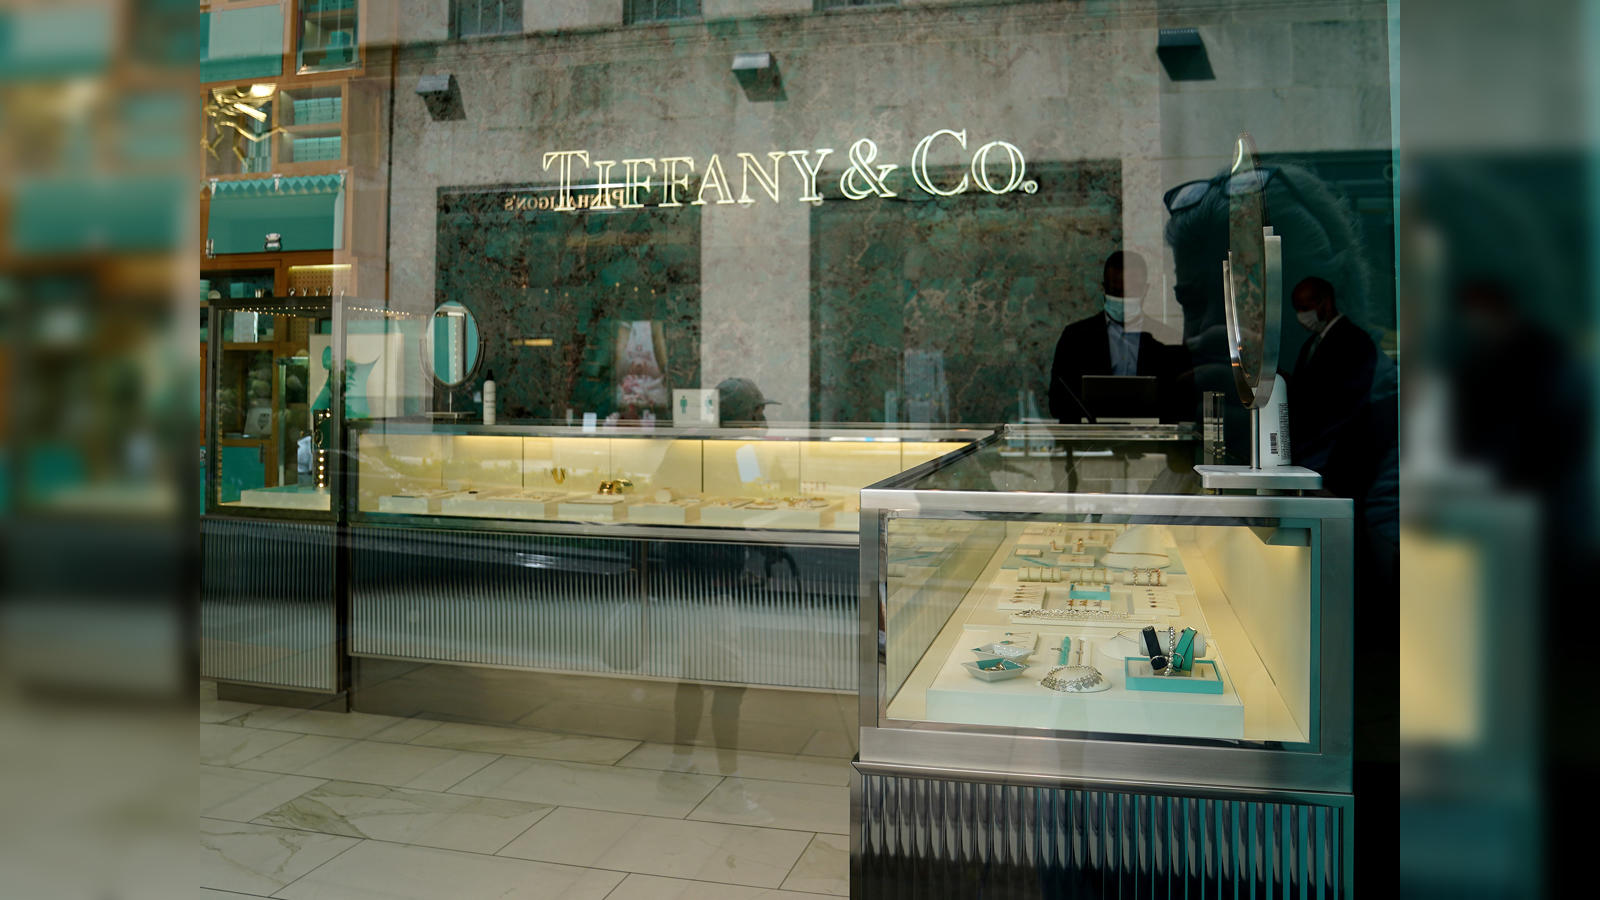 LVMH to buy Tiffany & Co. for $16 billion in largest luxury-goods deal ever